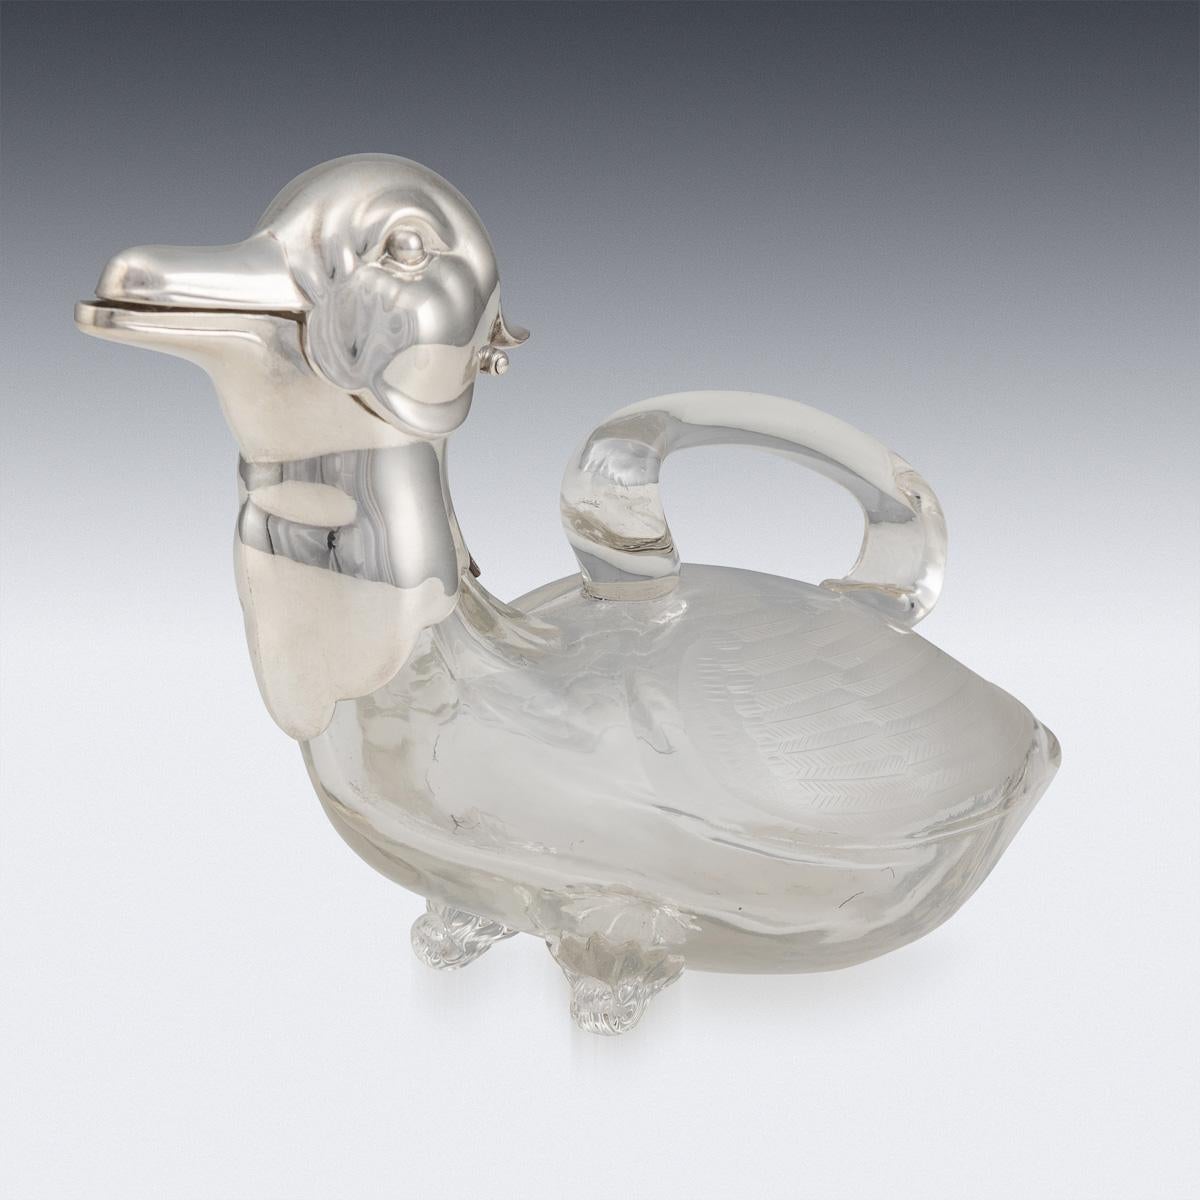 Superb mid-20th century silver plated mounted novelty claret jug modelled as a duck, plain glass body, the wings forming the handles, hinged head set with glass eyes. Such novelty claret jugs are rare and sought after. It is easy to imagine the